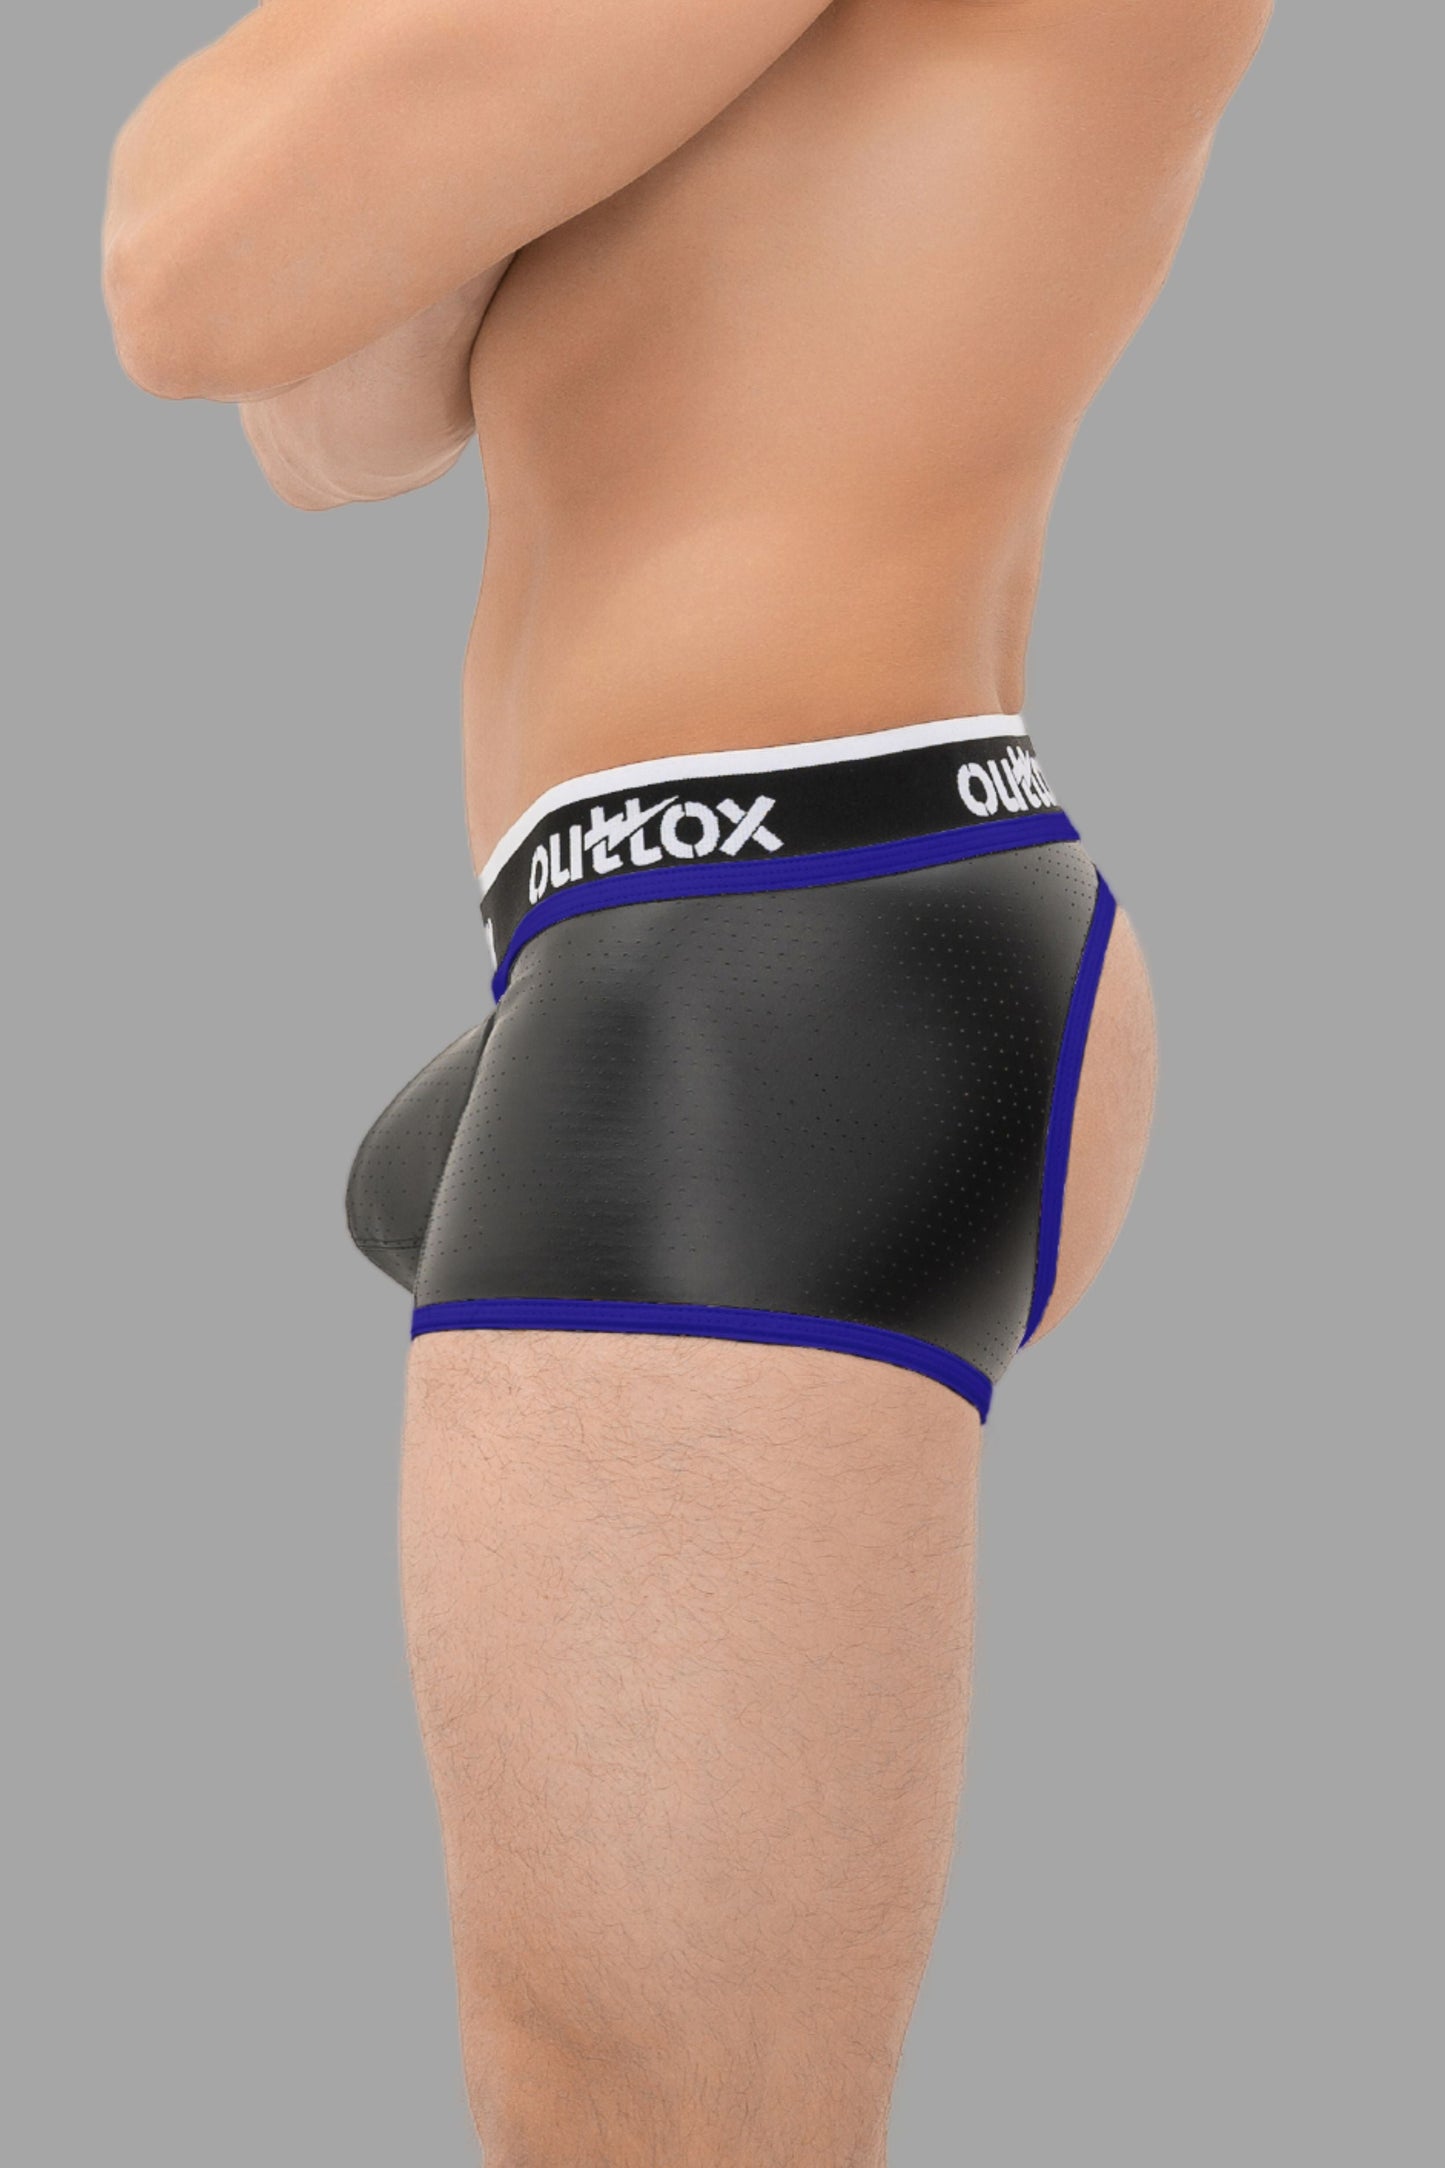 Outtox. Open Rear Trunk Shorts with Snap Codpiece. Black+Blue 'Royal'